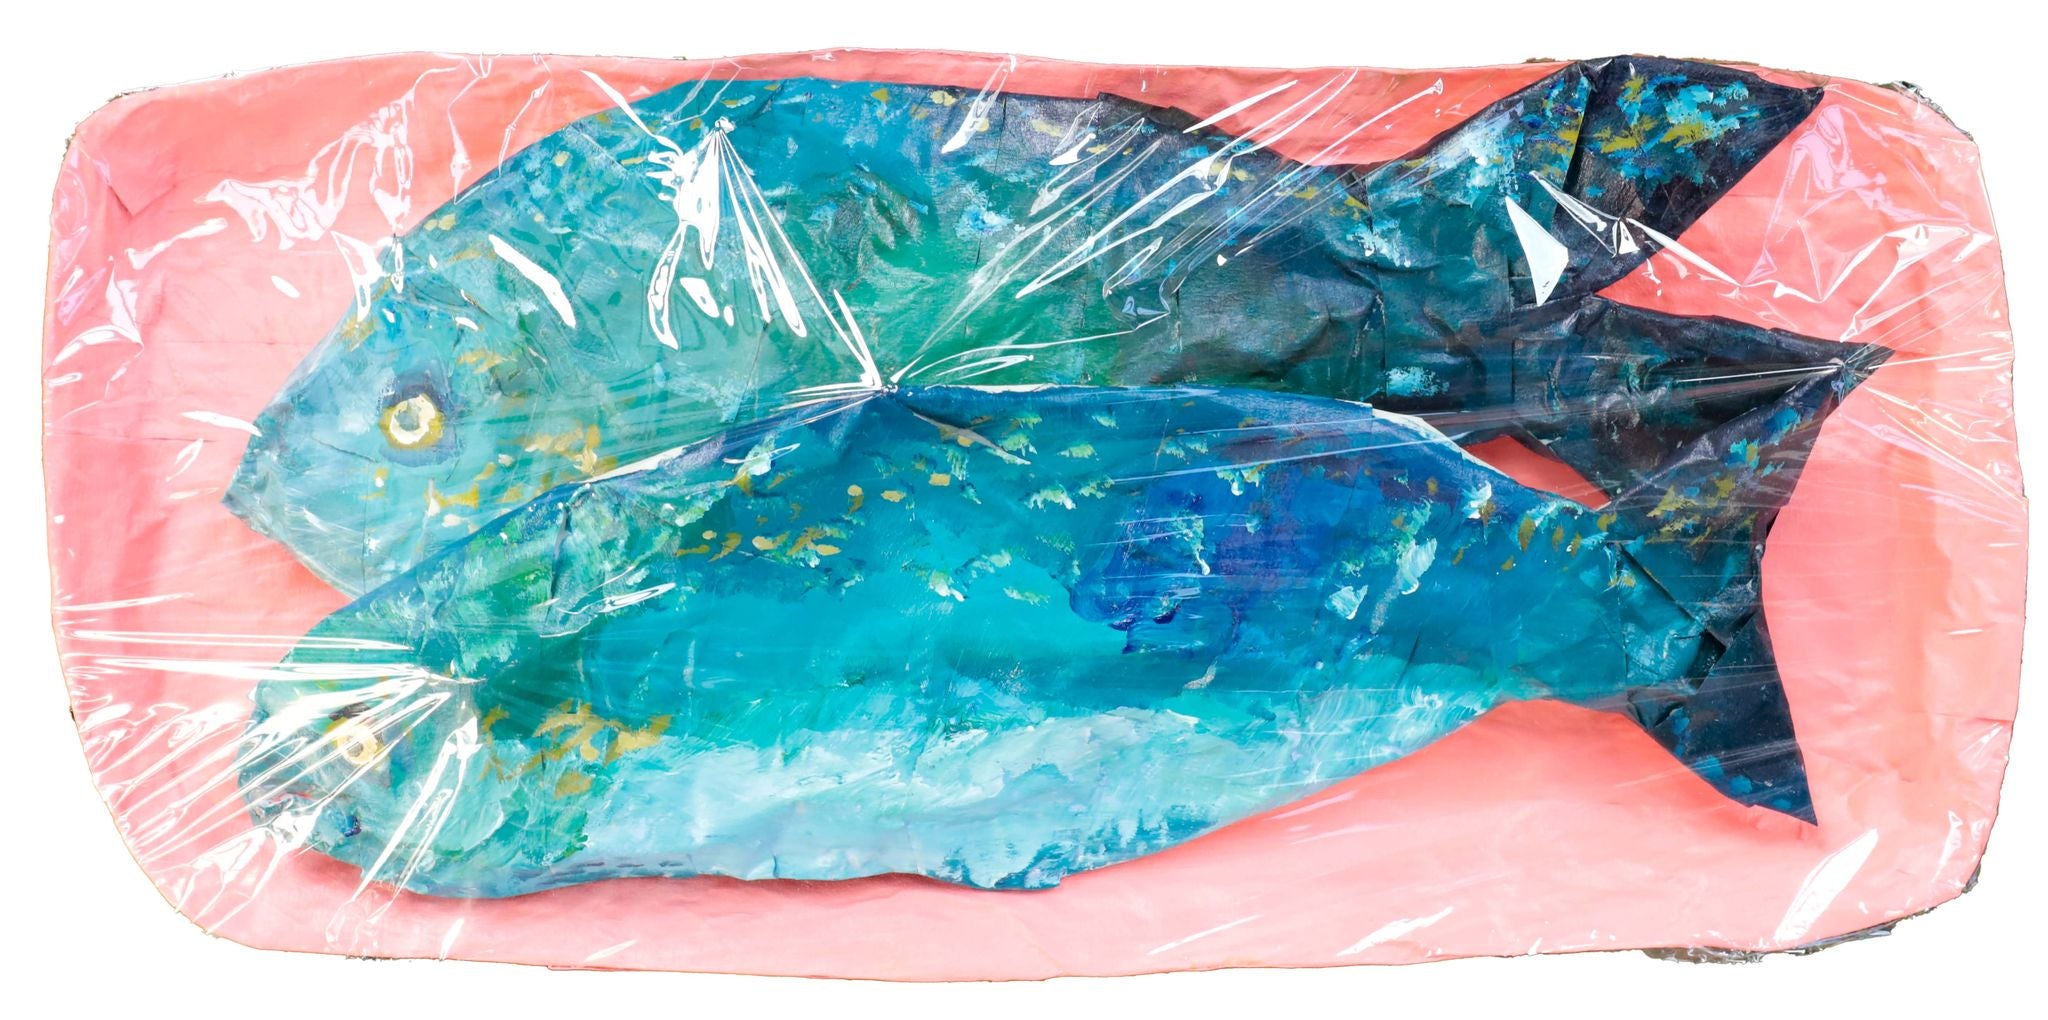 Taylor Lee Nicholson, "Mystery Fish in Cling Wrap" SOLD